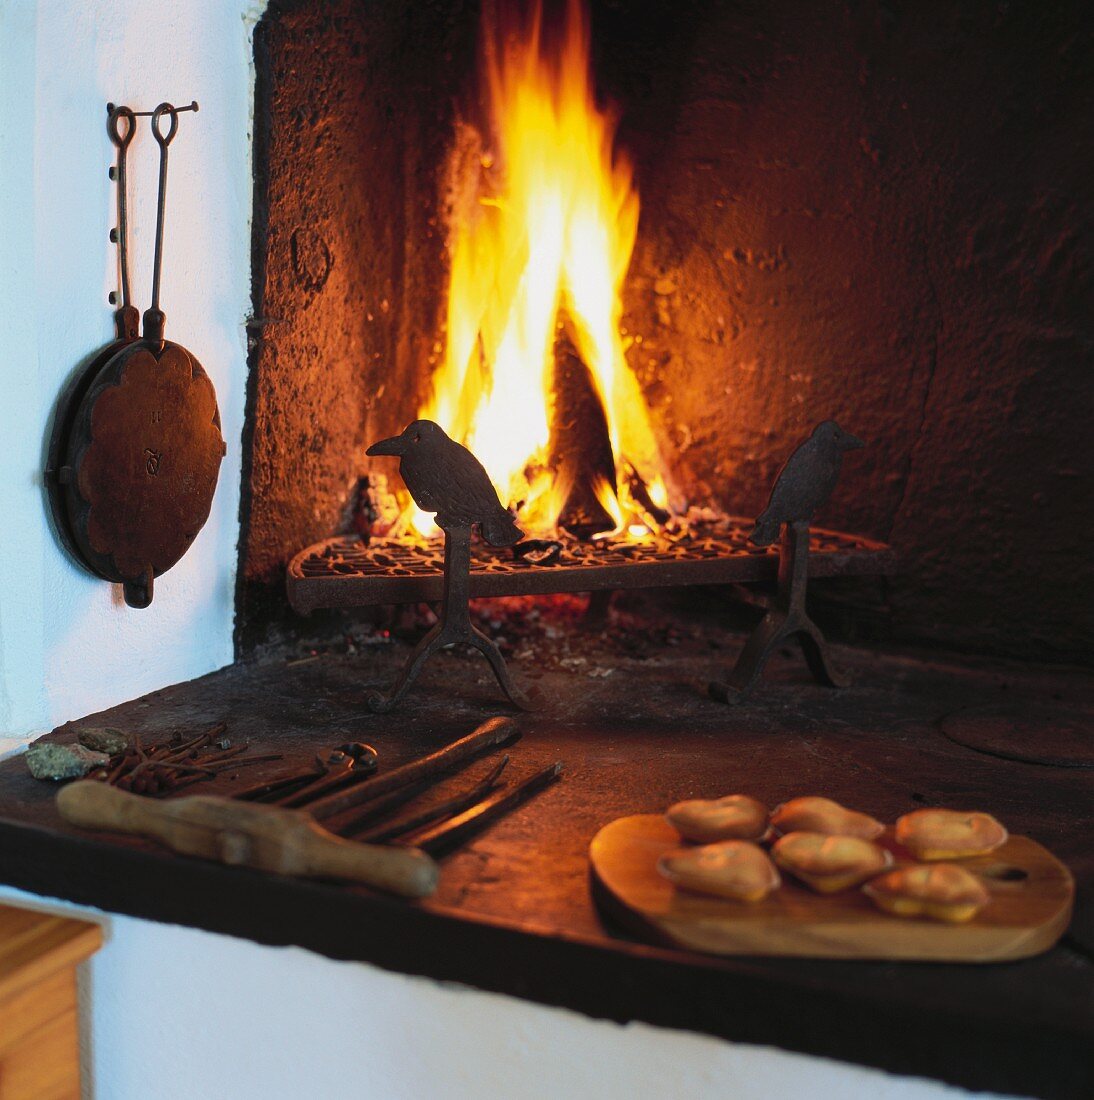 Rustic hearth with open fire (Scandinavia)